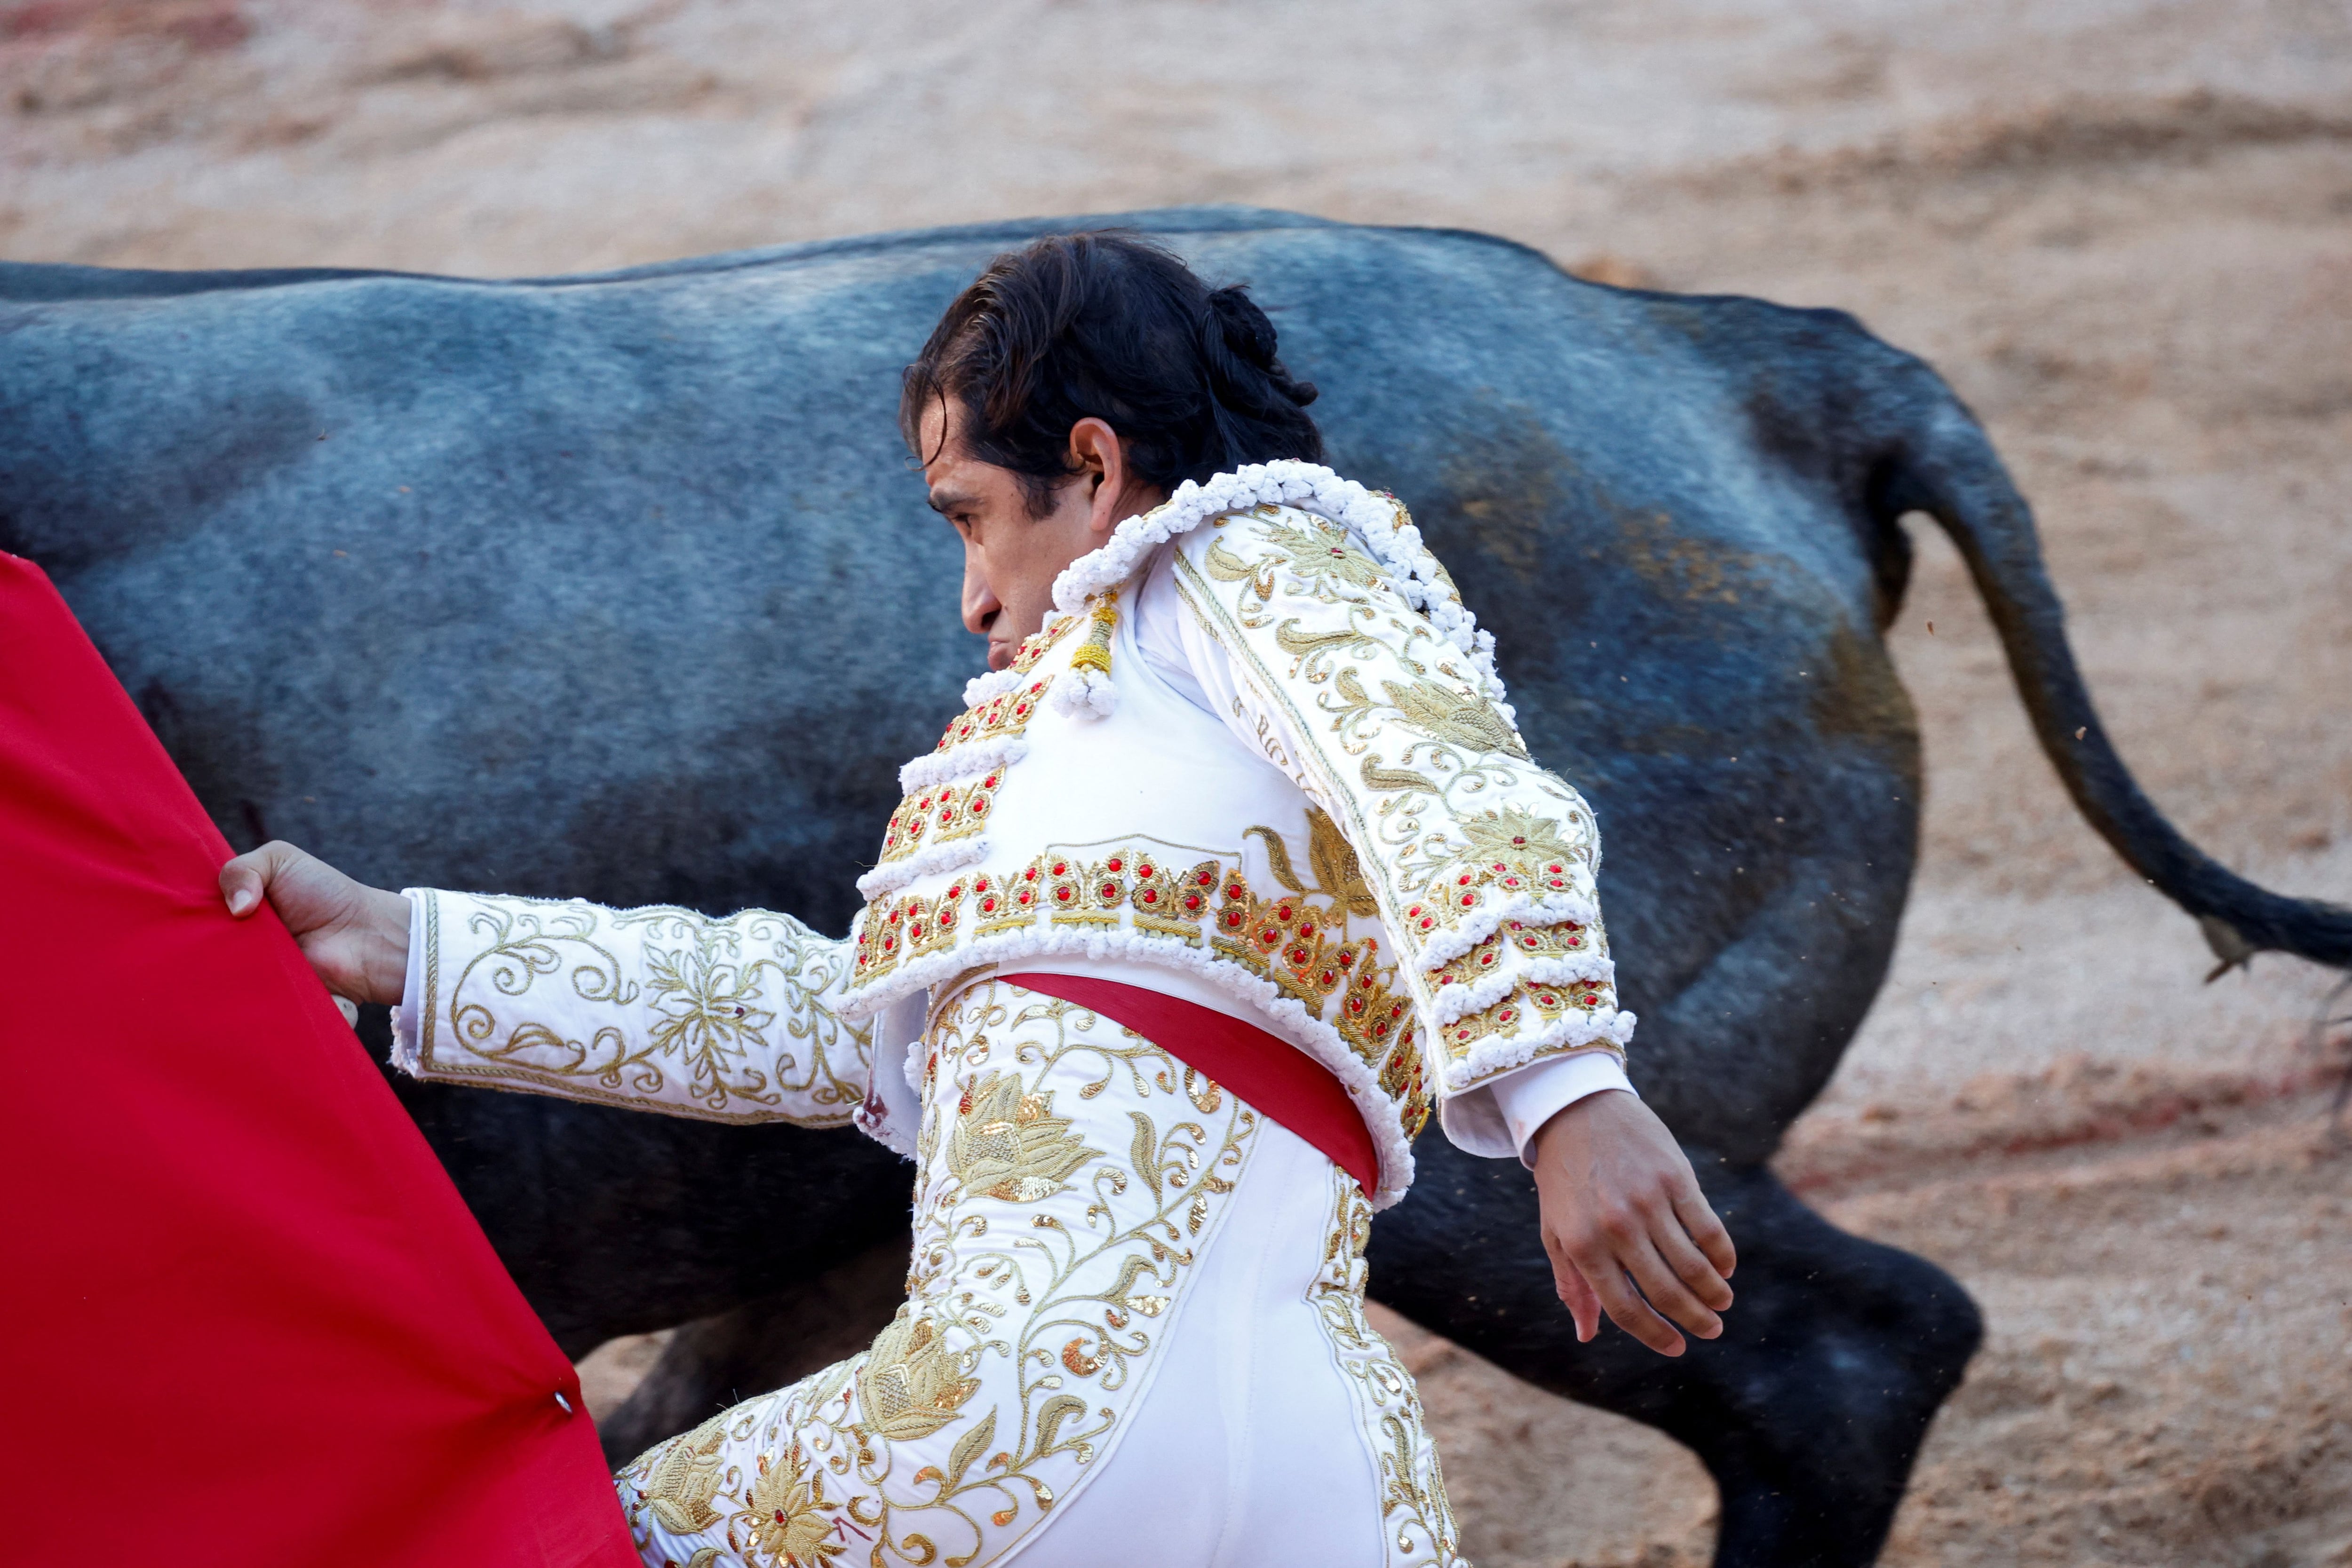 Mexican bullfighter Joselito Adame performs a pass during a bullfight at the San Fermin festival in Pamplona, Spain, July 9, 2022. REUTERS/Juan Medina